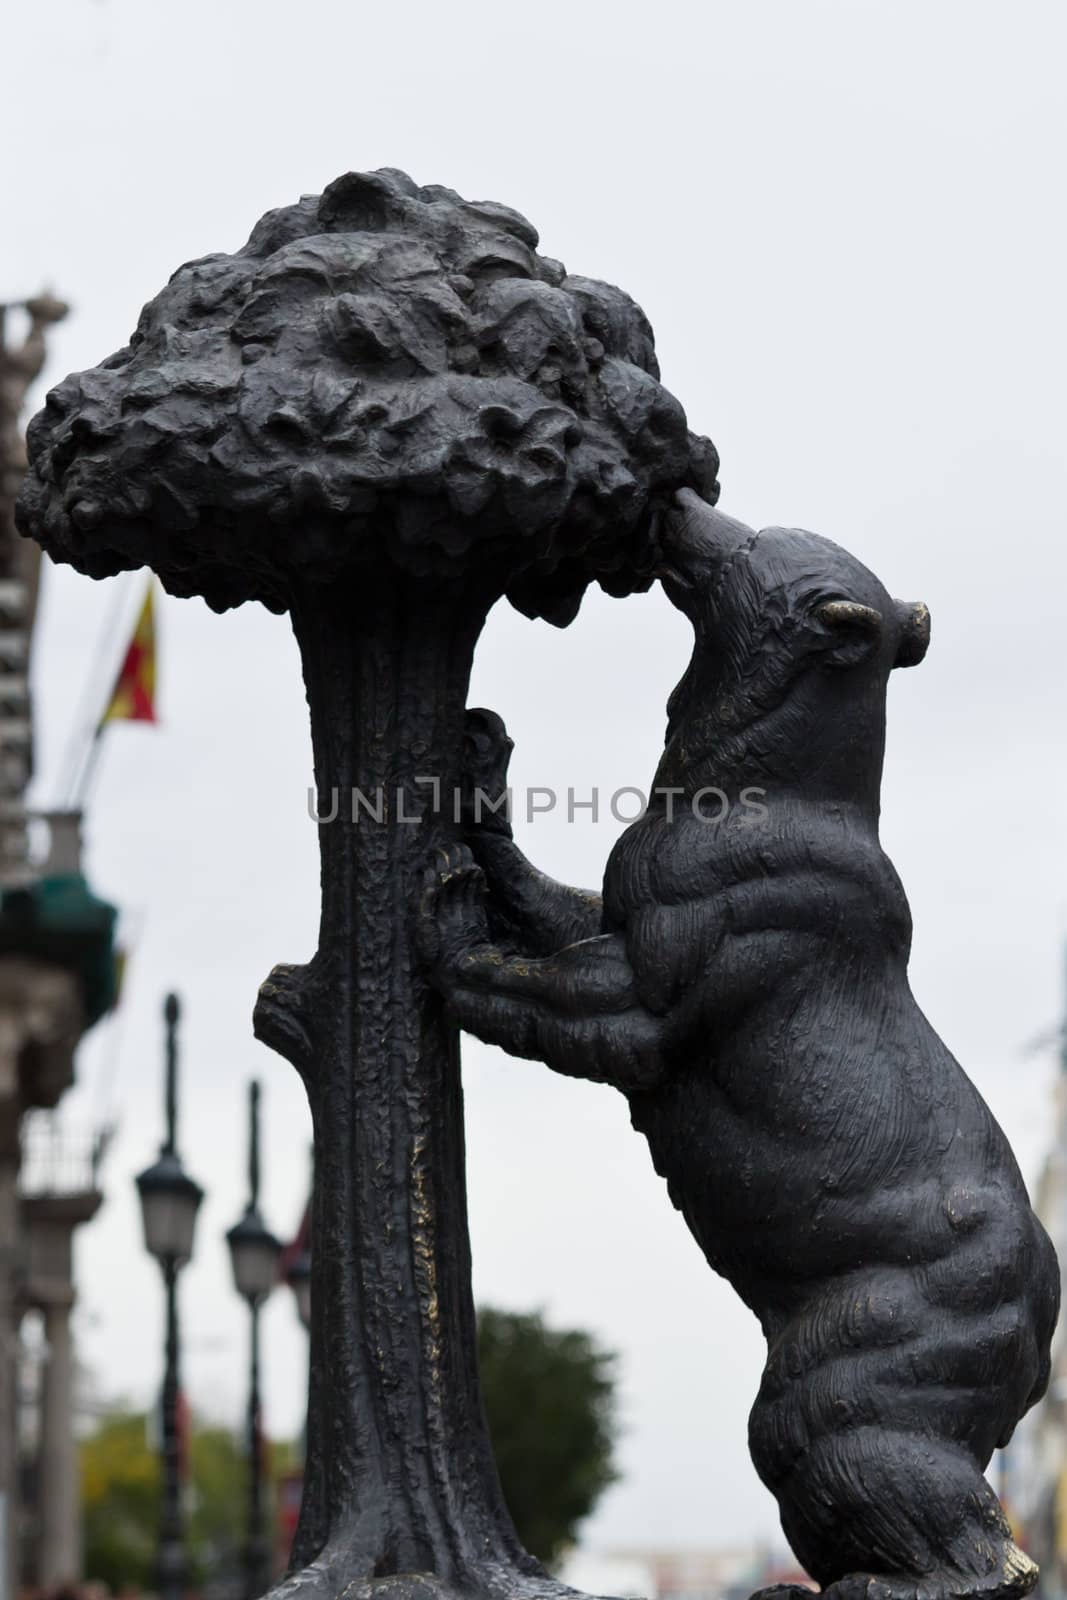 The famous symbol of Madrid on Puerta del Sol